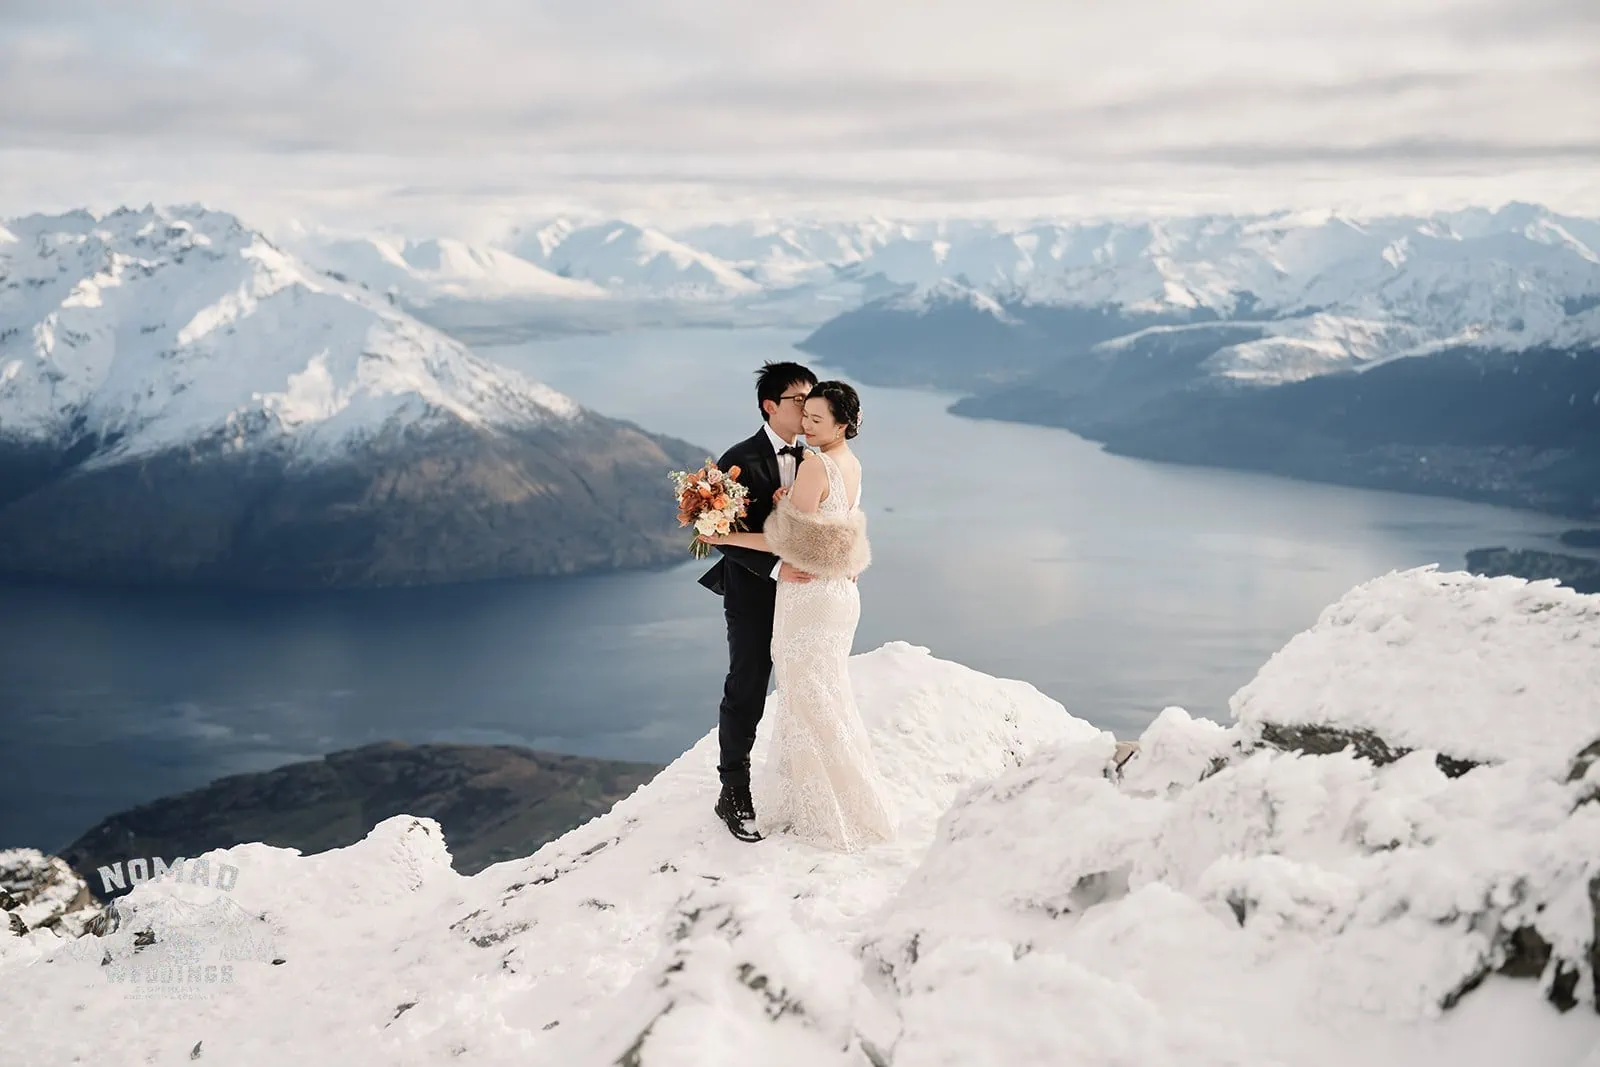 Joanna and Tony, a bride and groom, posing during their pre-wedding shoot on a mountain overlooking Lake Wanaka in Queenstown, New Zealand.